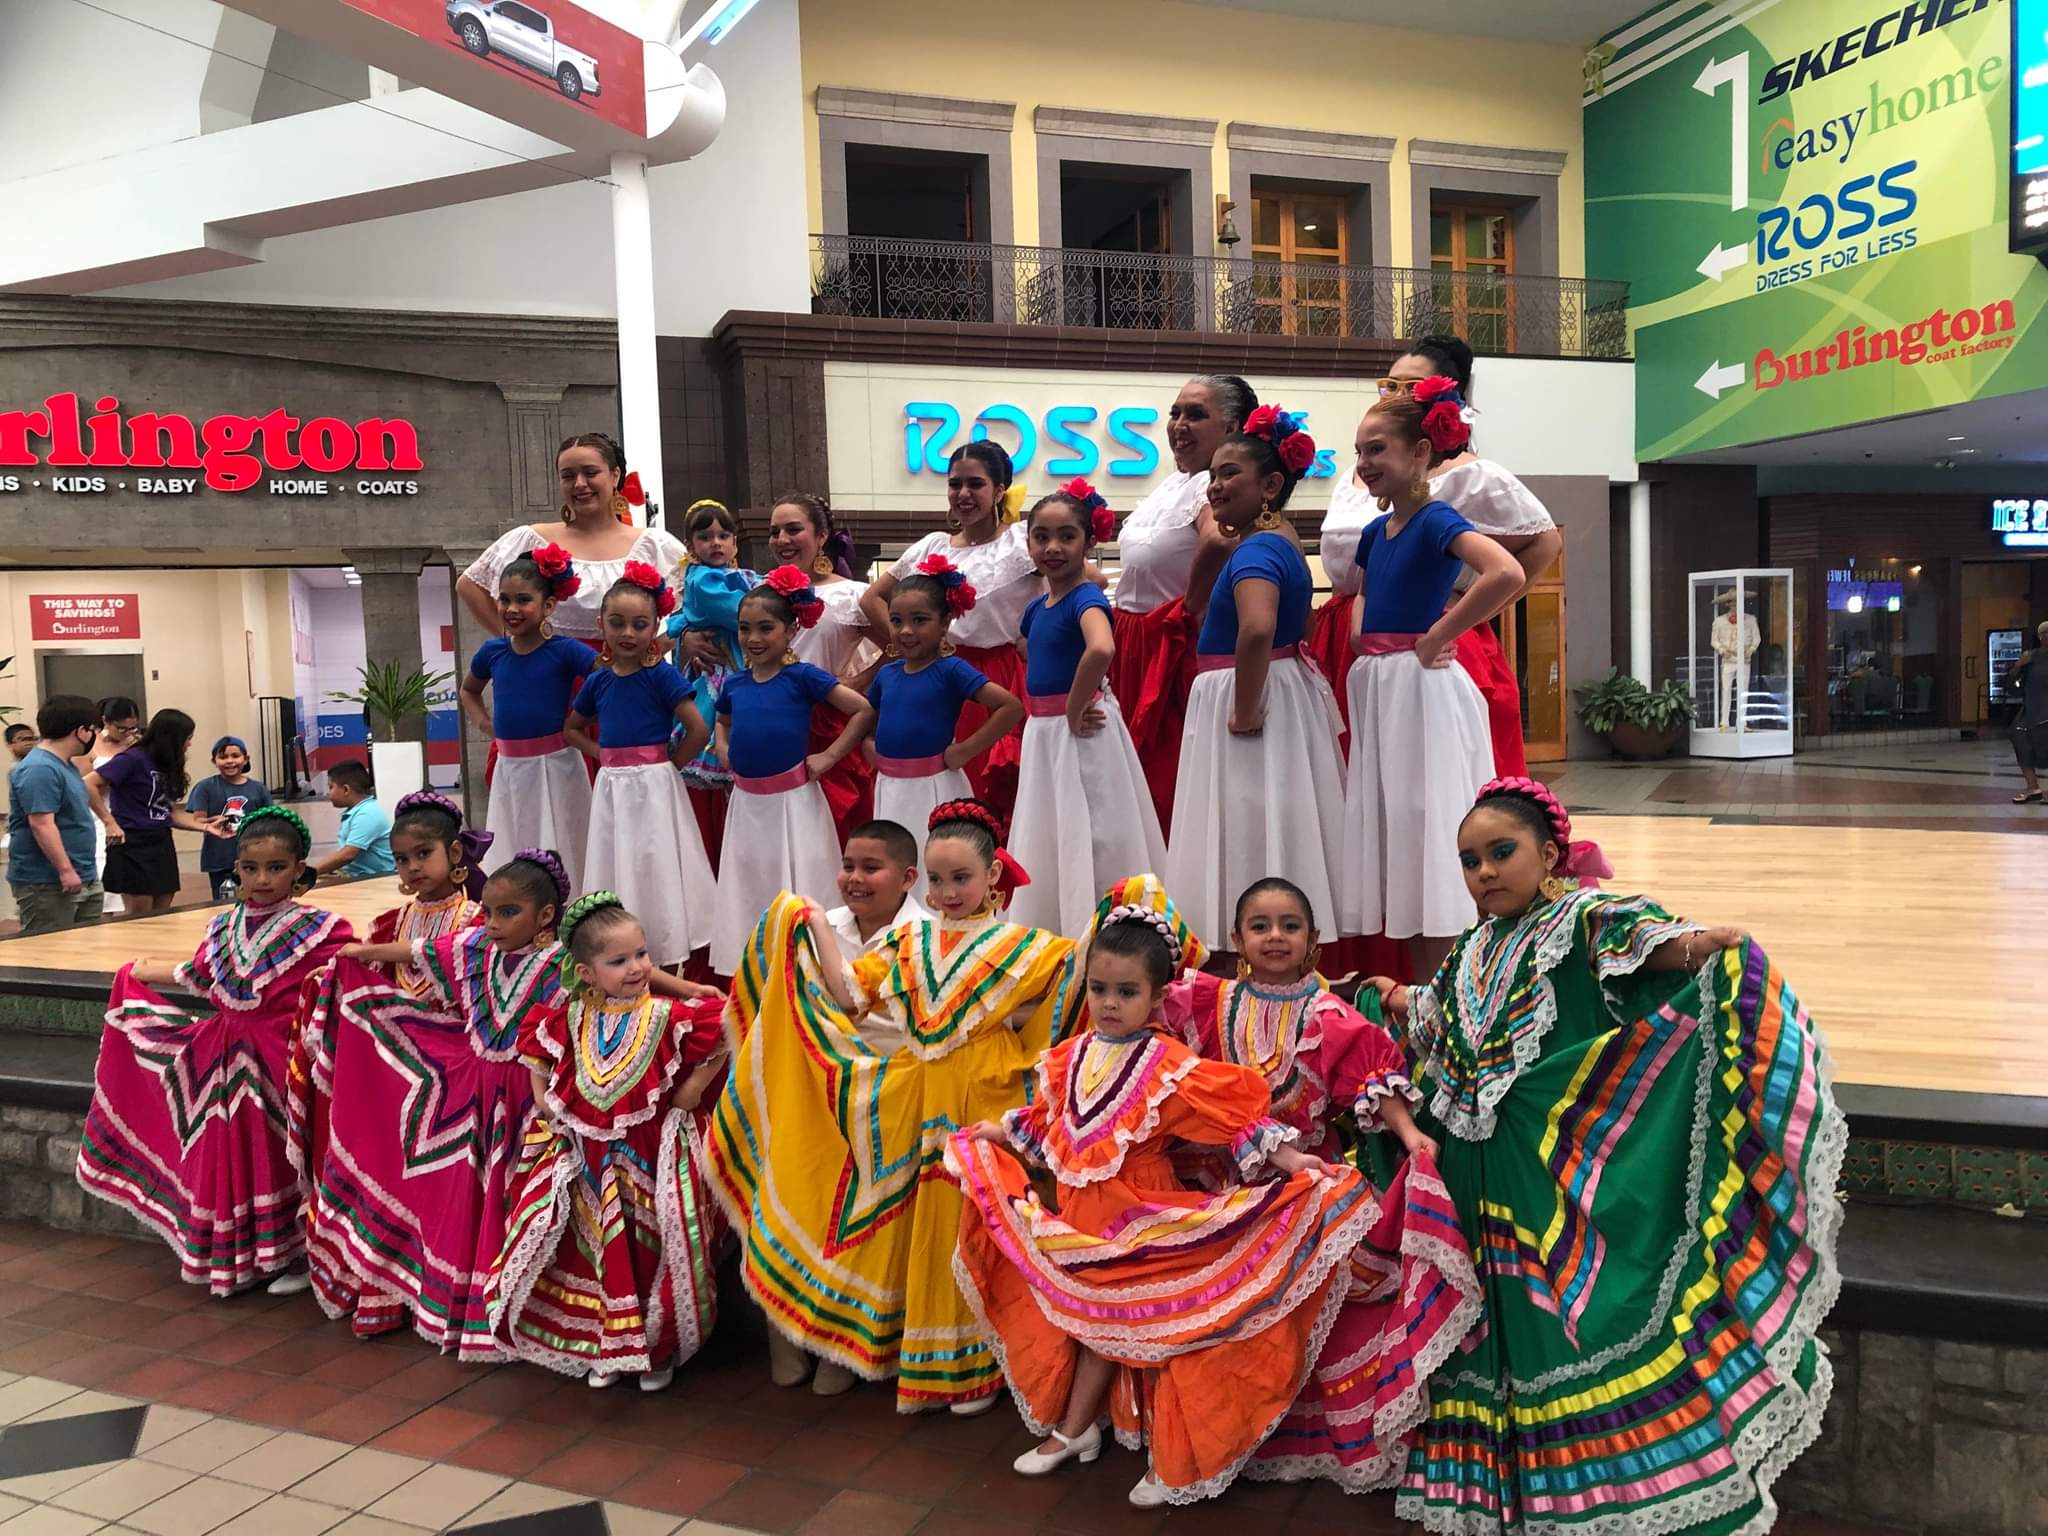 Group of Folklorico dancers posing for a photo on a stage inside a mall